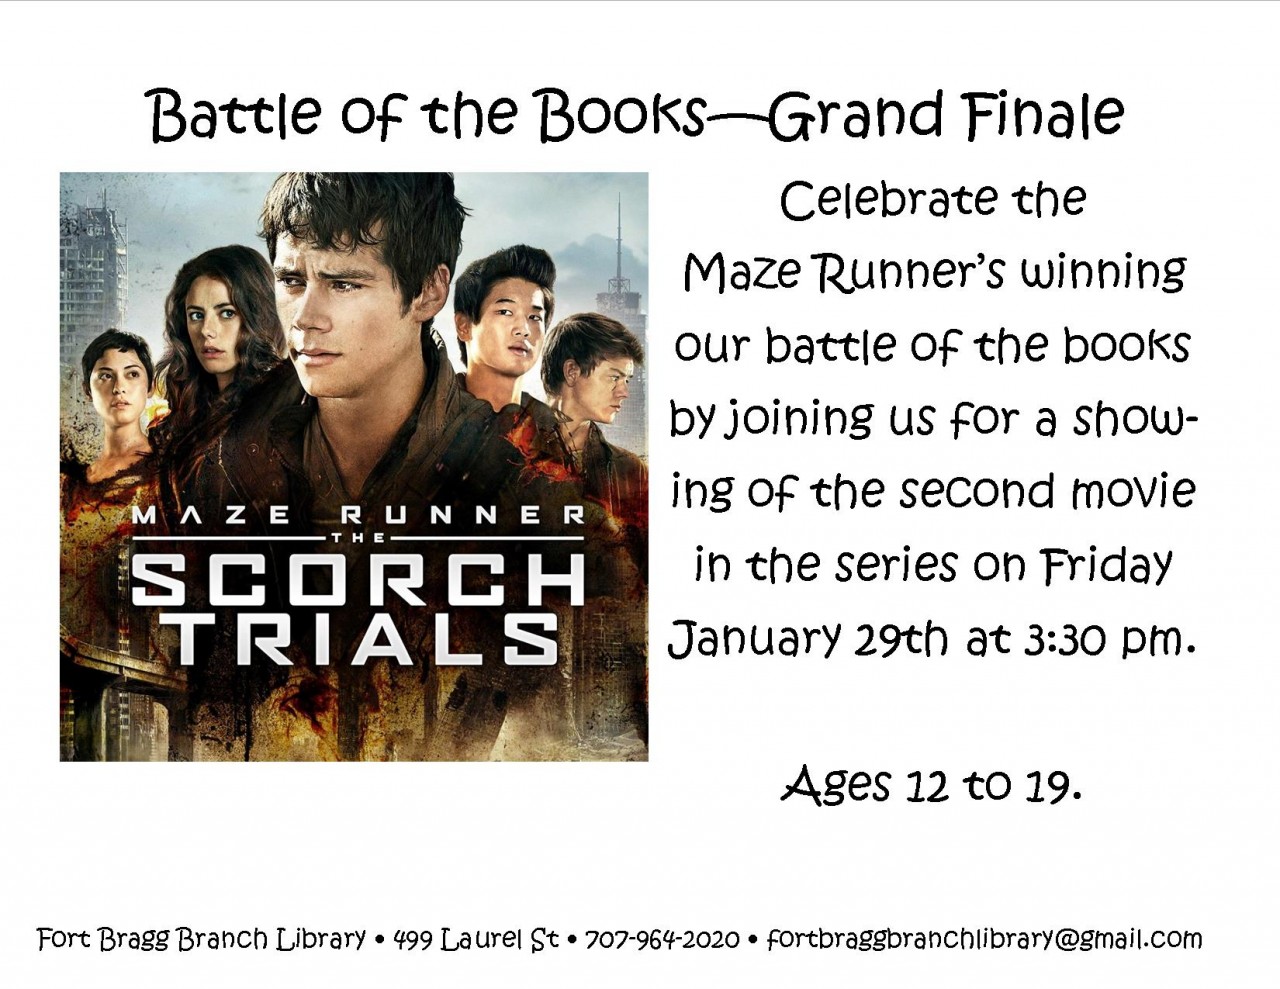 Battle of the Books Finale